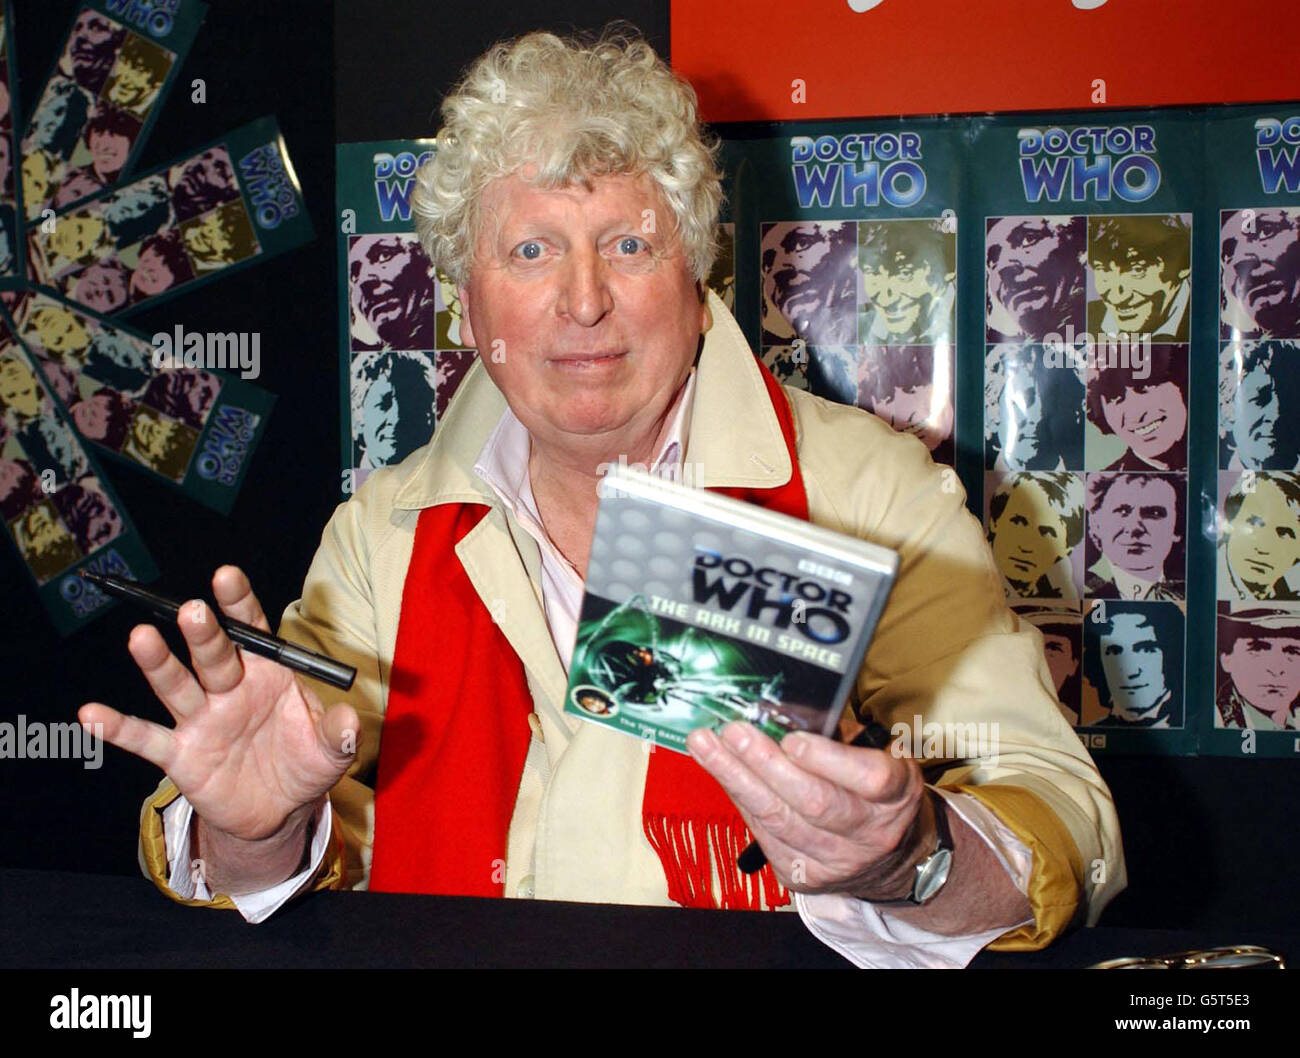 Former Doctor Who, actor Tom Baker signs copies of the DVD of 'The Ark in  Space', the latest Doctor Who adventure to be released on DVD at the Virgin  Megastore on Oxford